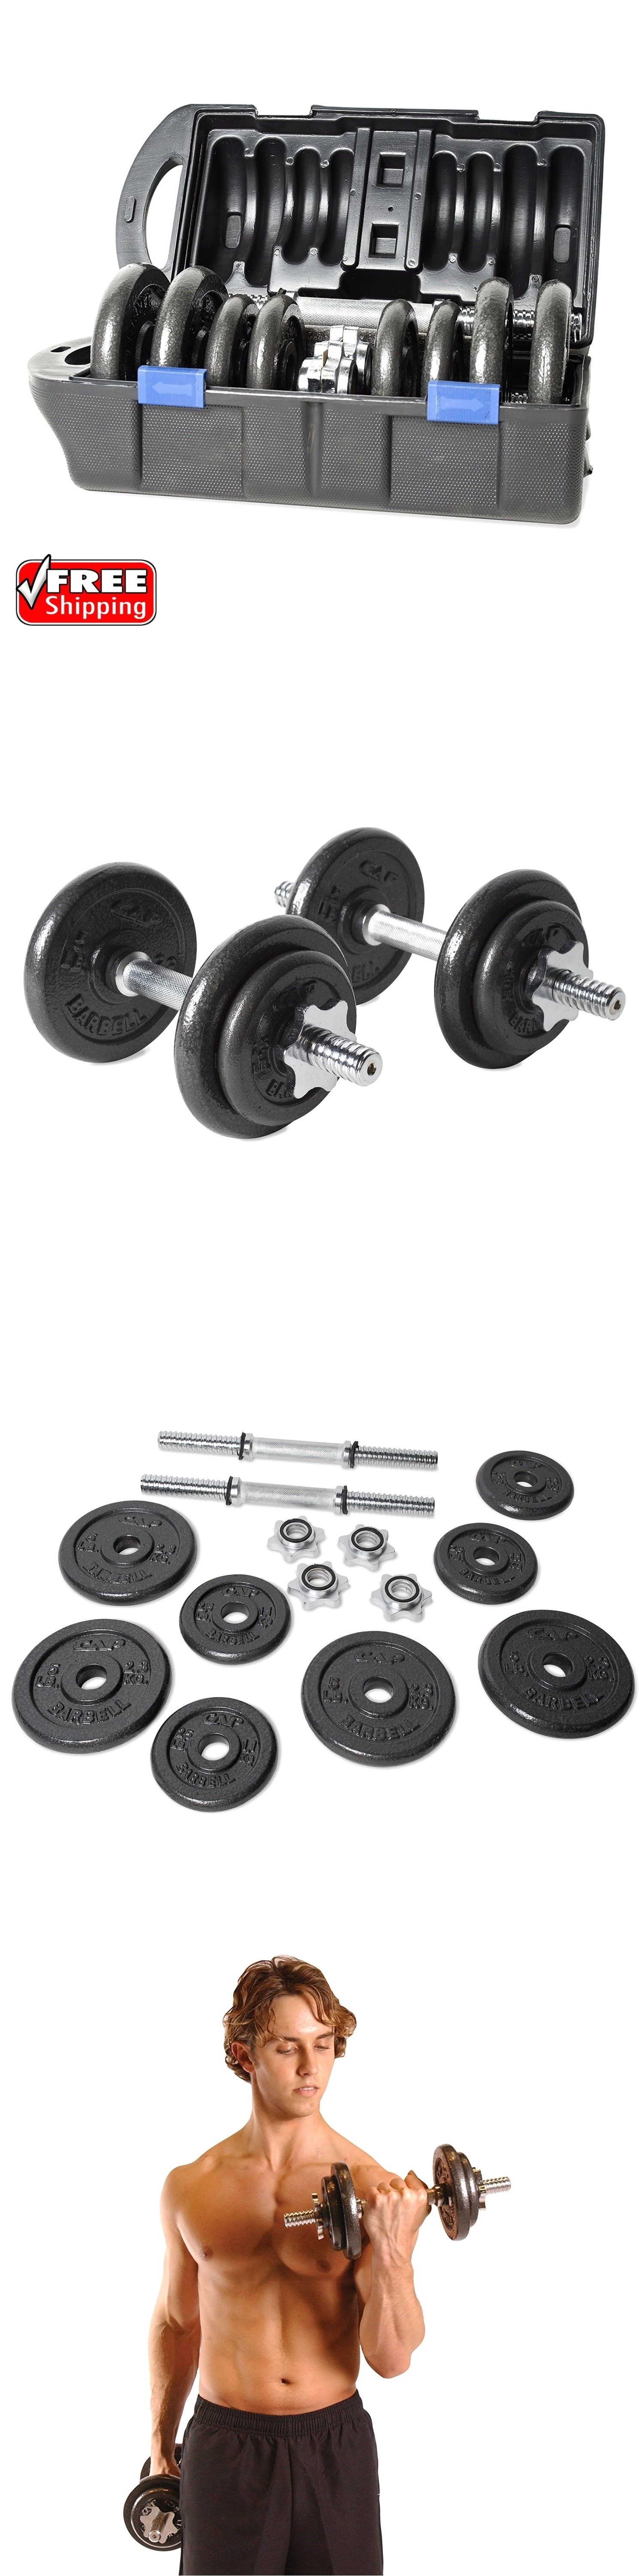 dumbbells 137865 set dumbbell weight barbell gym workout exercise lifting bar 40 lb fitness new